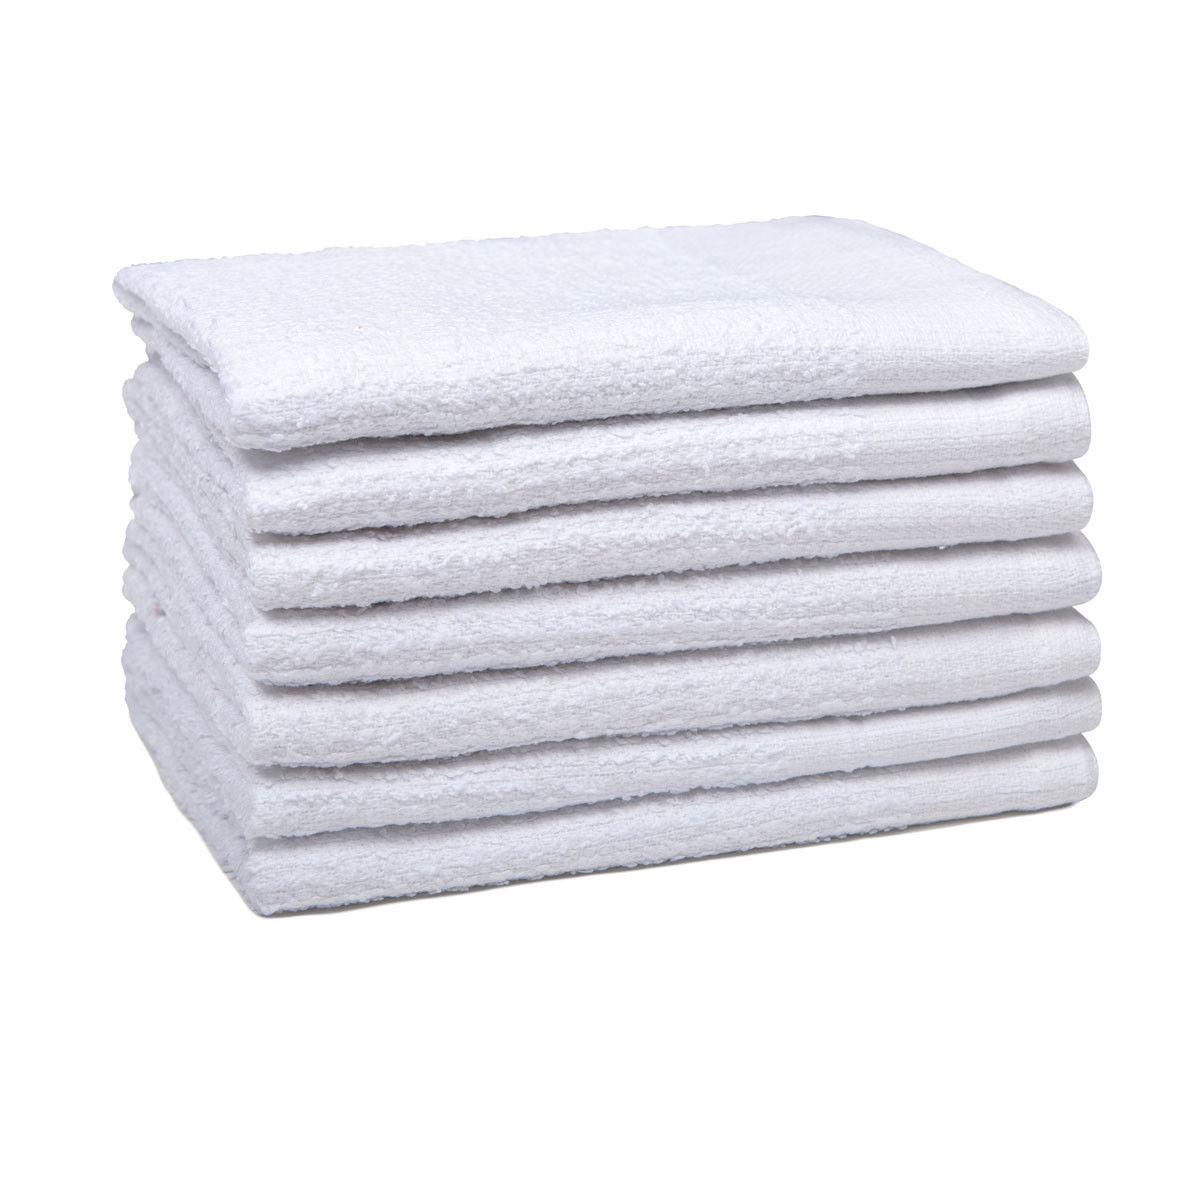 How are these bar towels packaged in Wholesale Bar Mop Towels by Intralin?